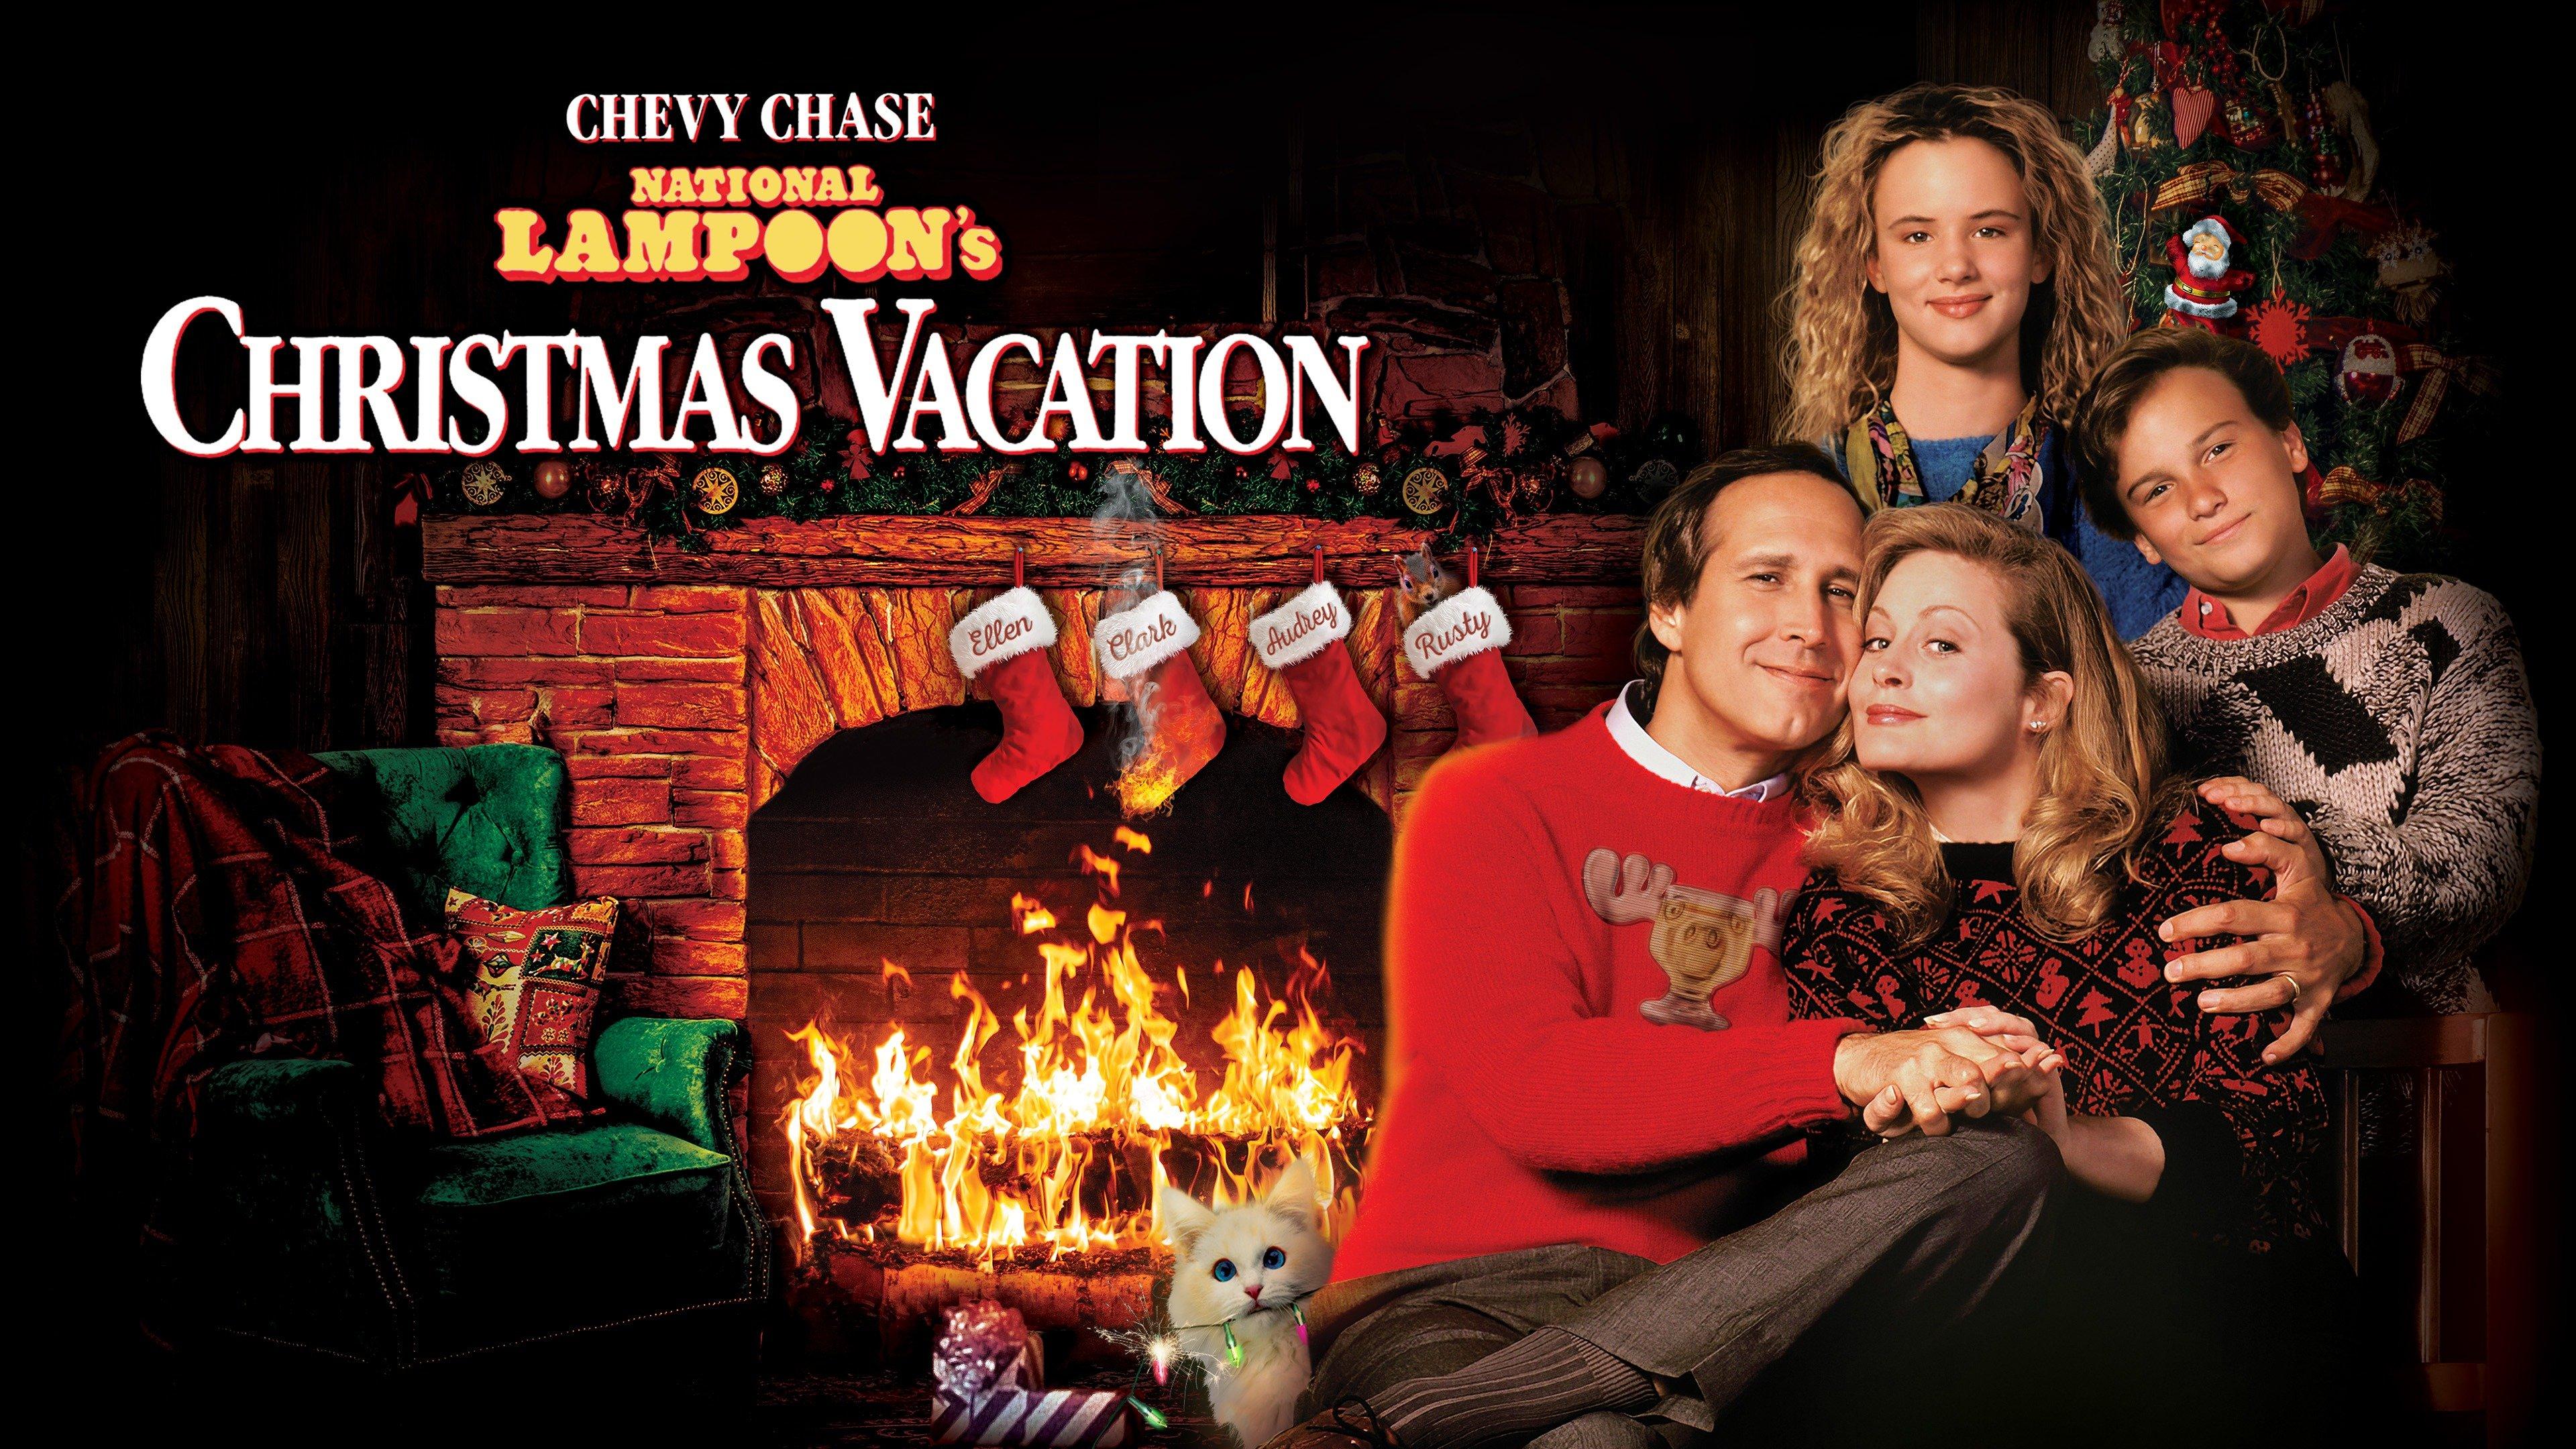 Watch National Lampoon's Christmas Vacation Streaming Online on Philo (Free Trial)